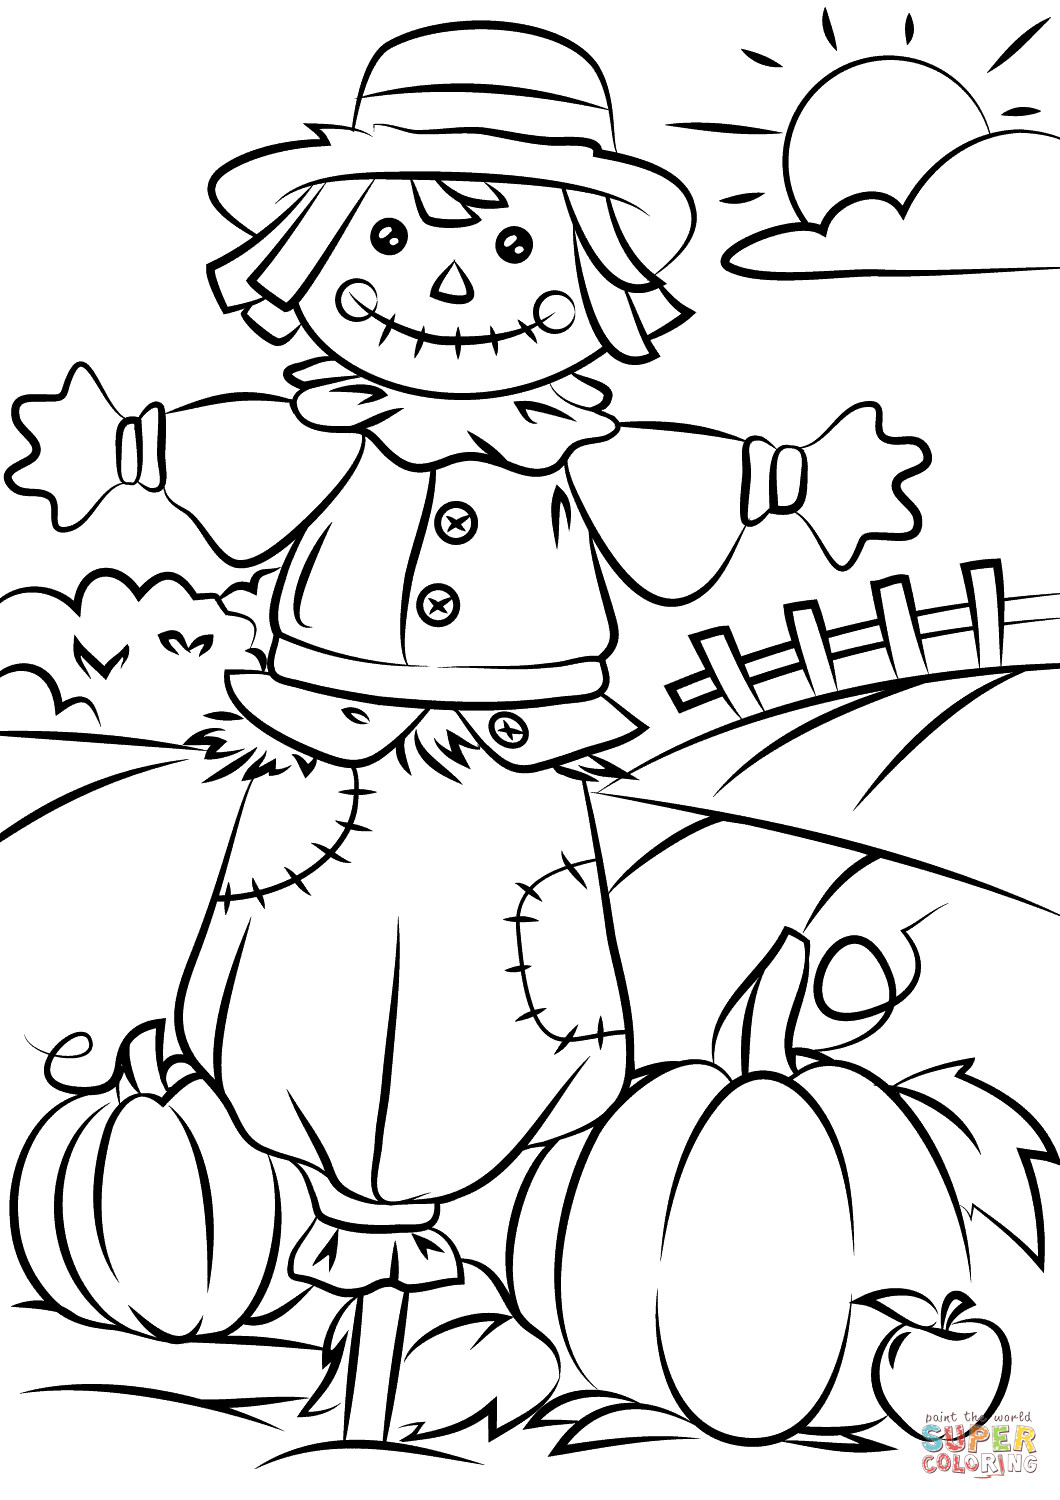 Fall Printables Coloring Pages
 Autumn Scene with Scarecrow coloring page